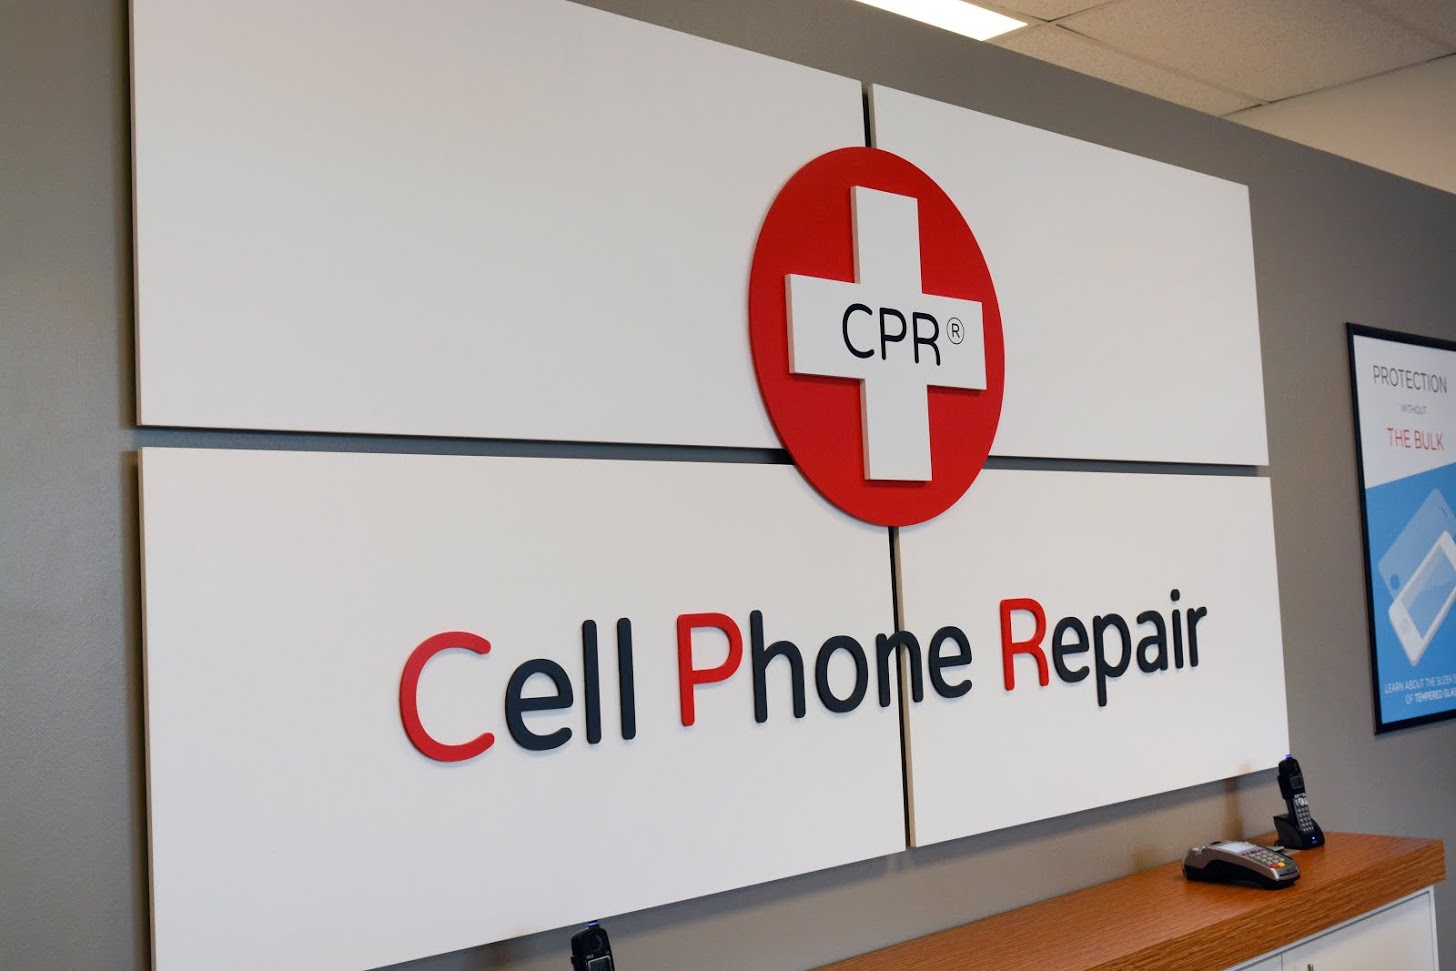 CPR Cell Phone Repair, Thursday, January 9, 2020, Press release picture